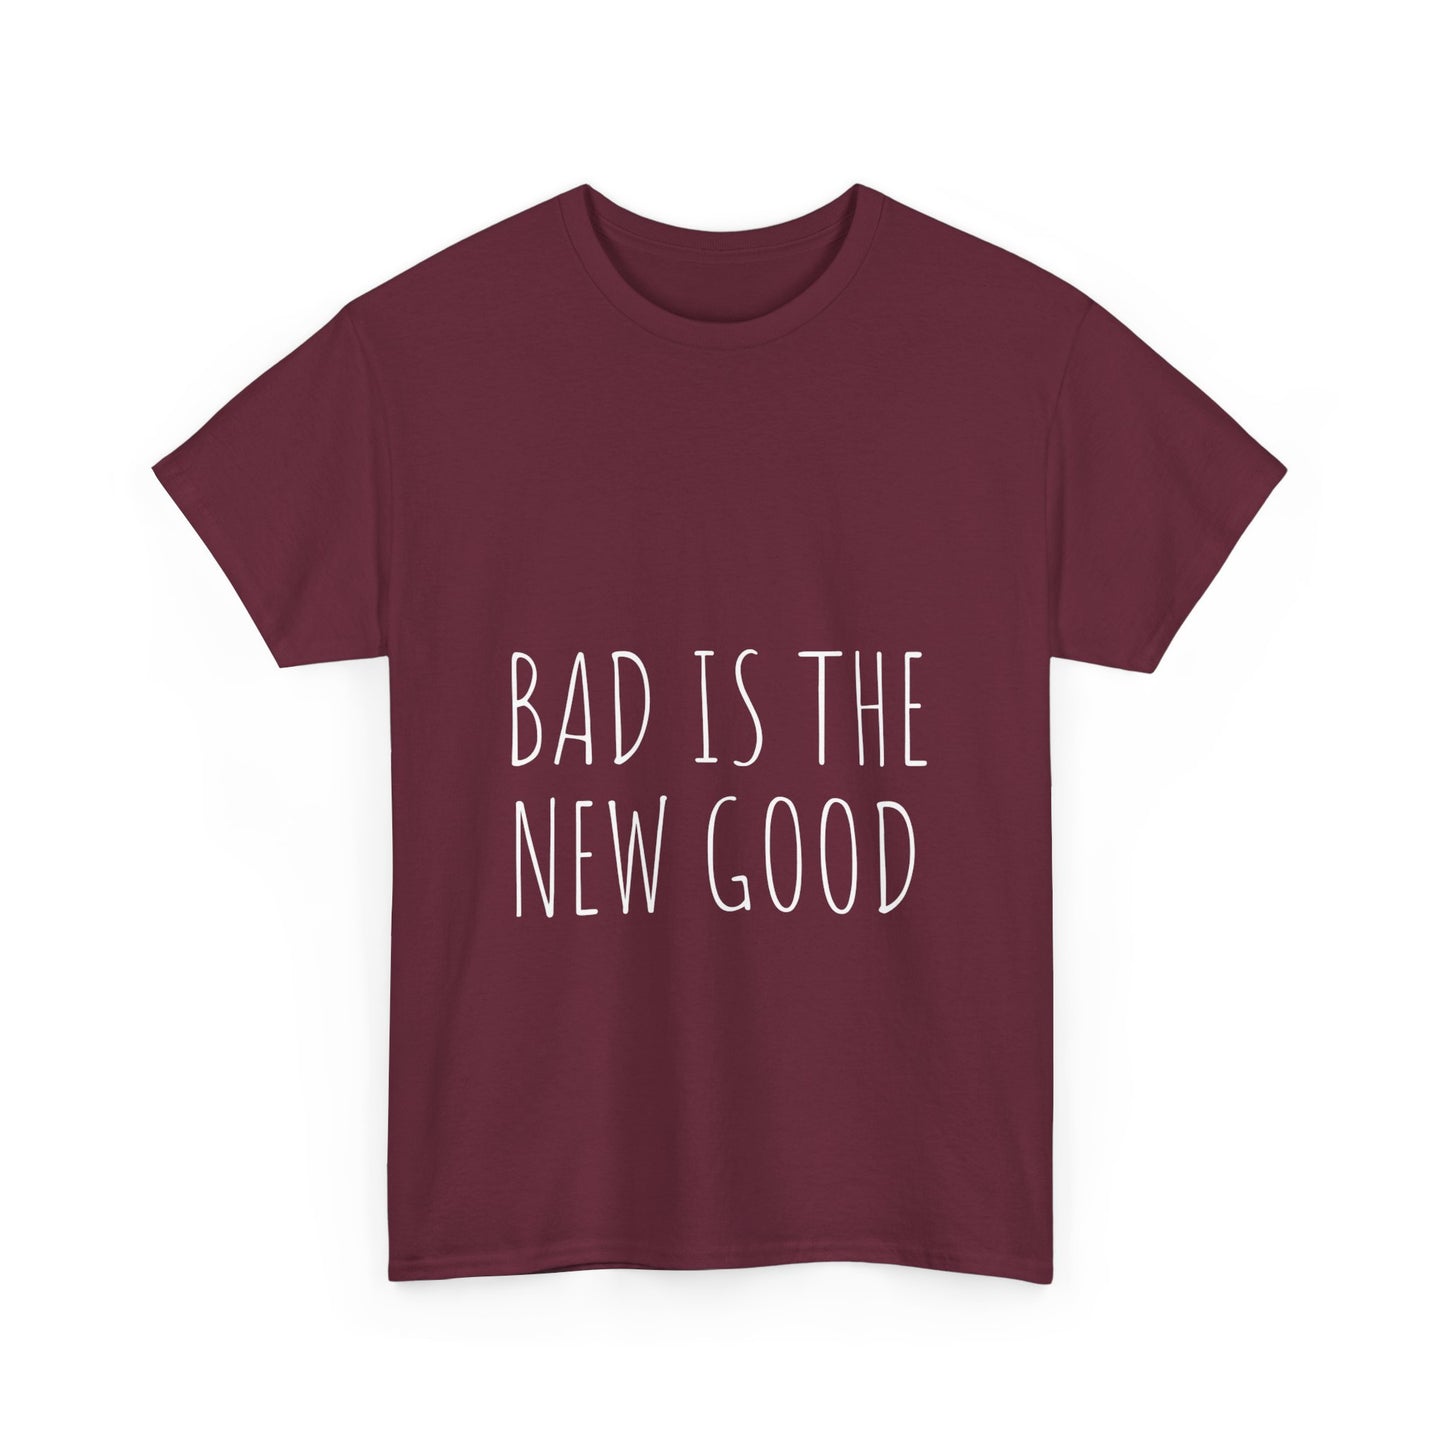 Bad is the new Good